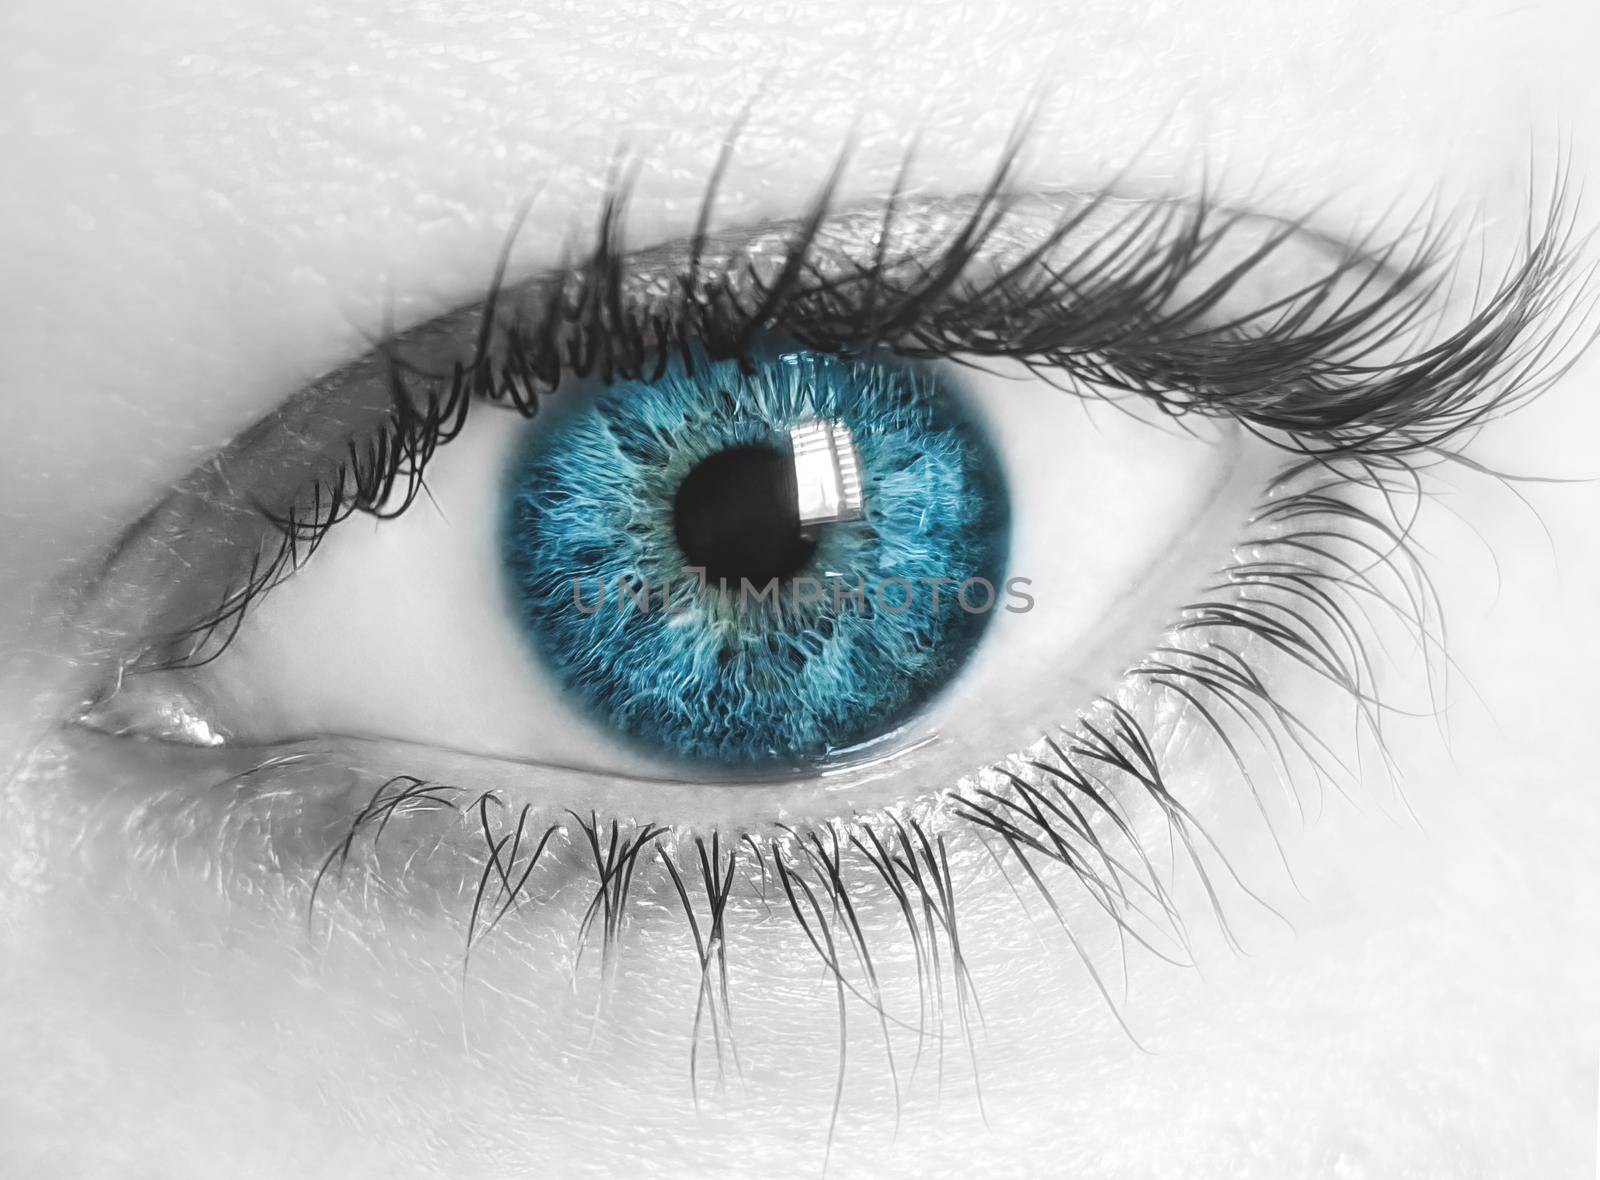 macro image of human eye with blue iris and desaturated skin. Close-up view